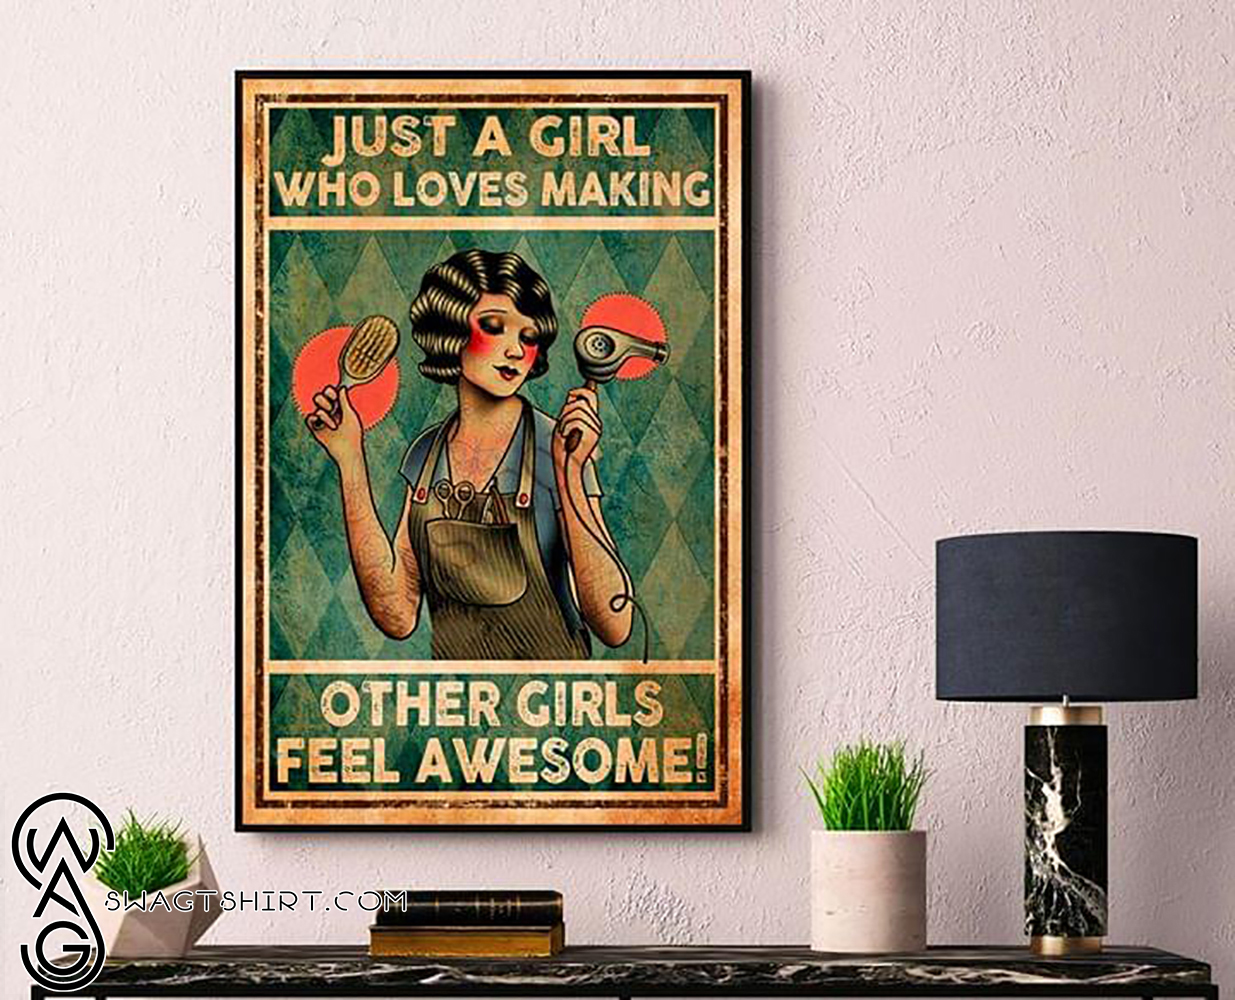 Hairdresser just a girl who loves making other girls feel awesome retro poster